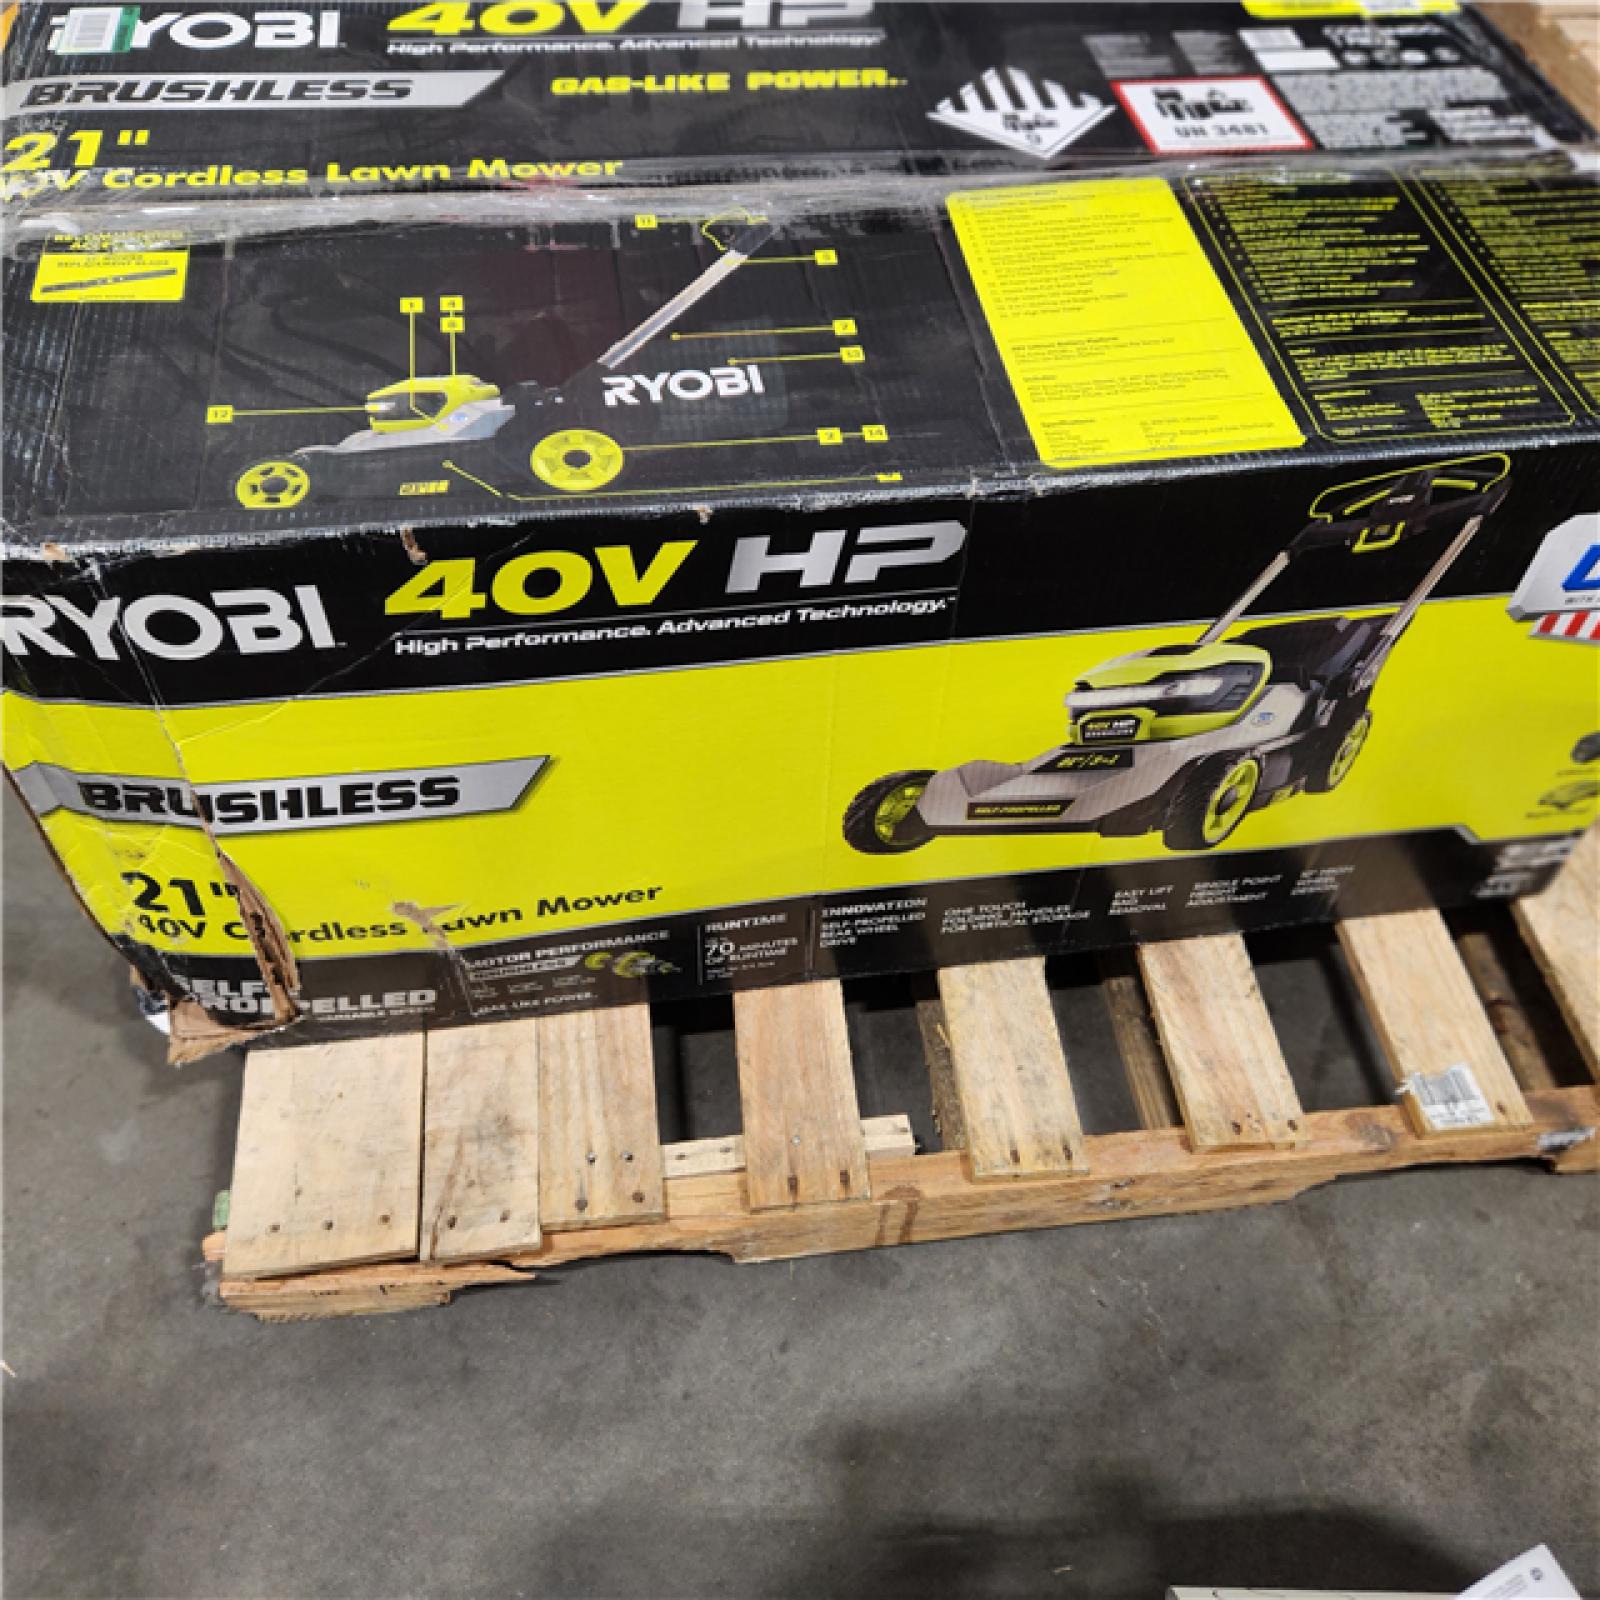 Dallas Location - As-Is RYOBI 40V HP Brushless 21 in.Self-Propelled Lawn Mower with (2) 6.0 Ah Batteries and Charger-Appears Like New Condition